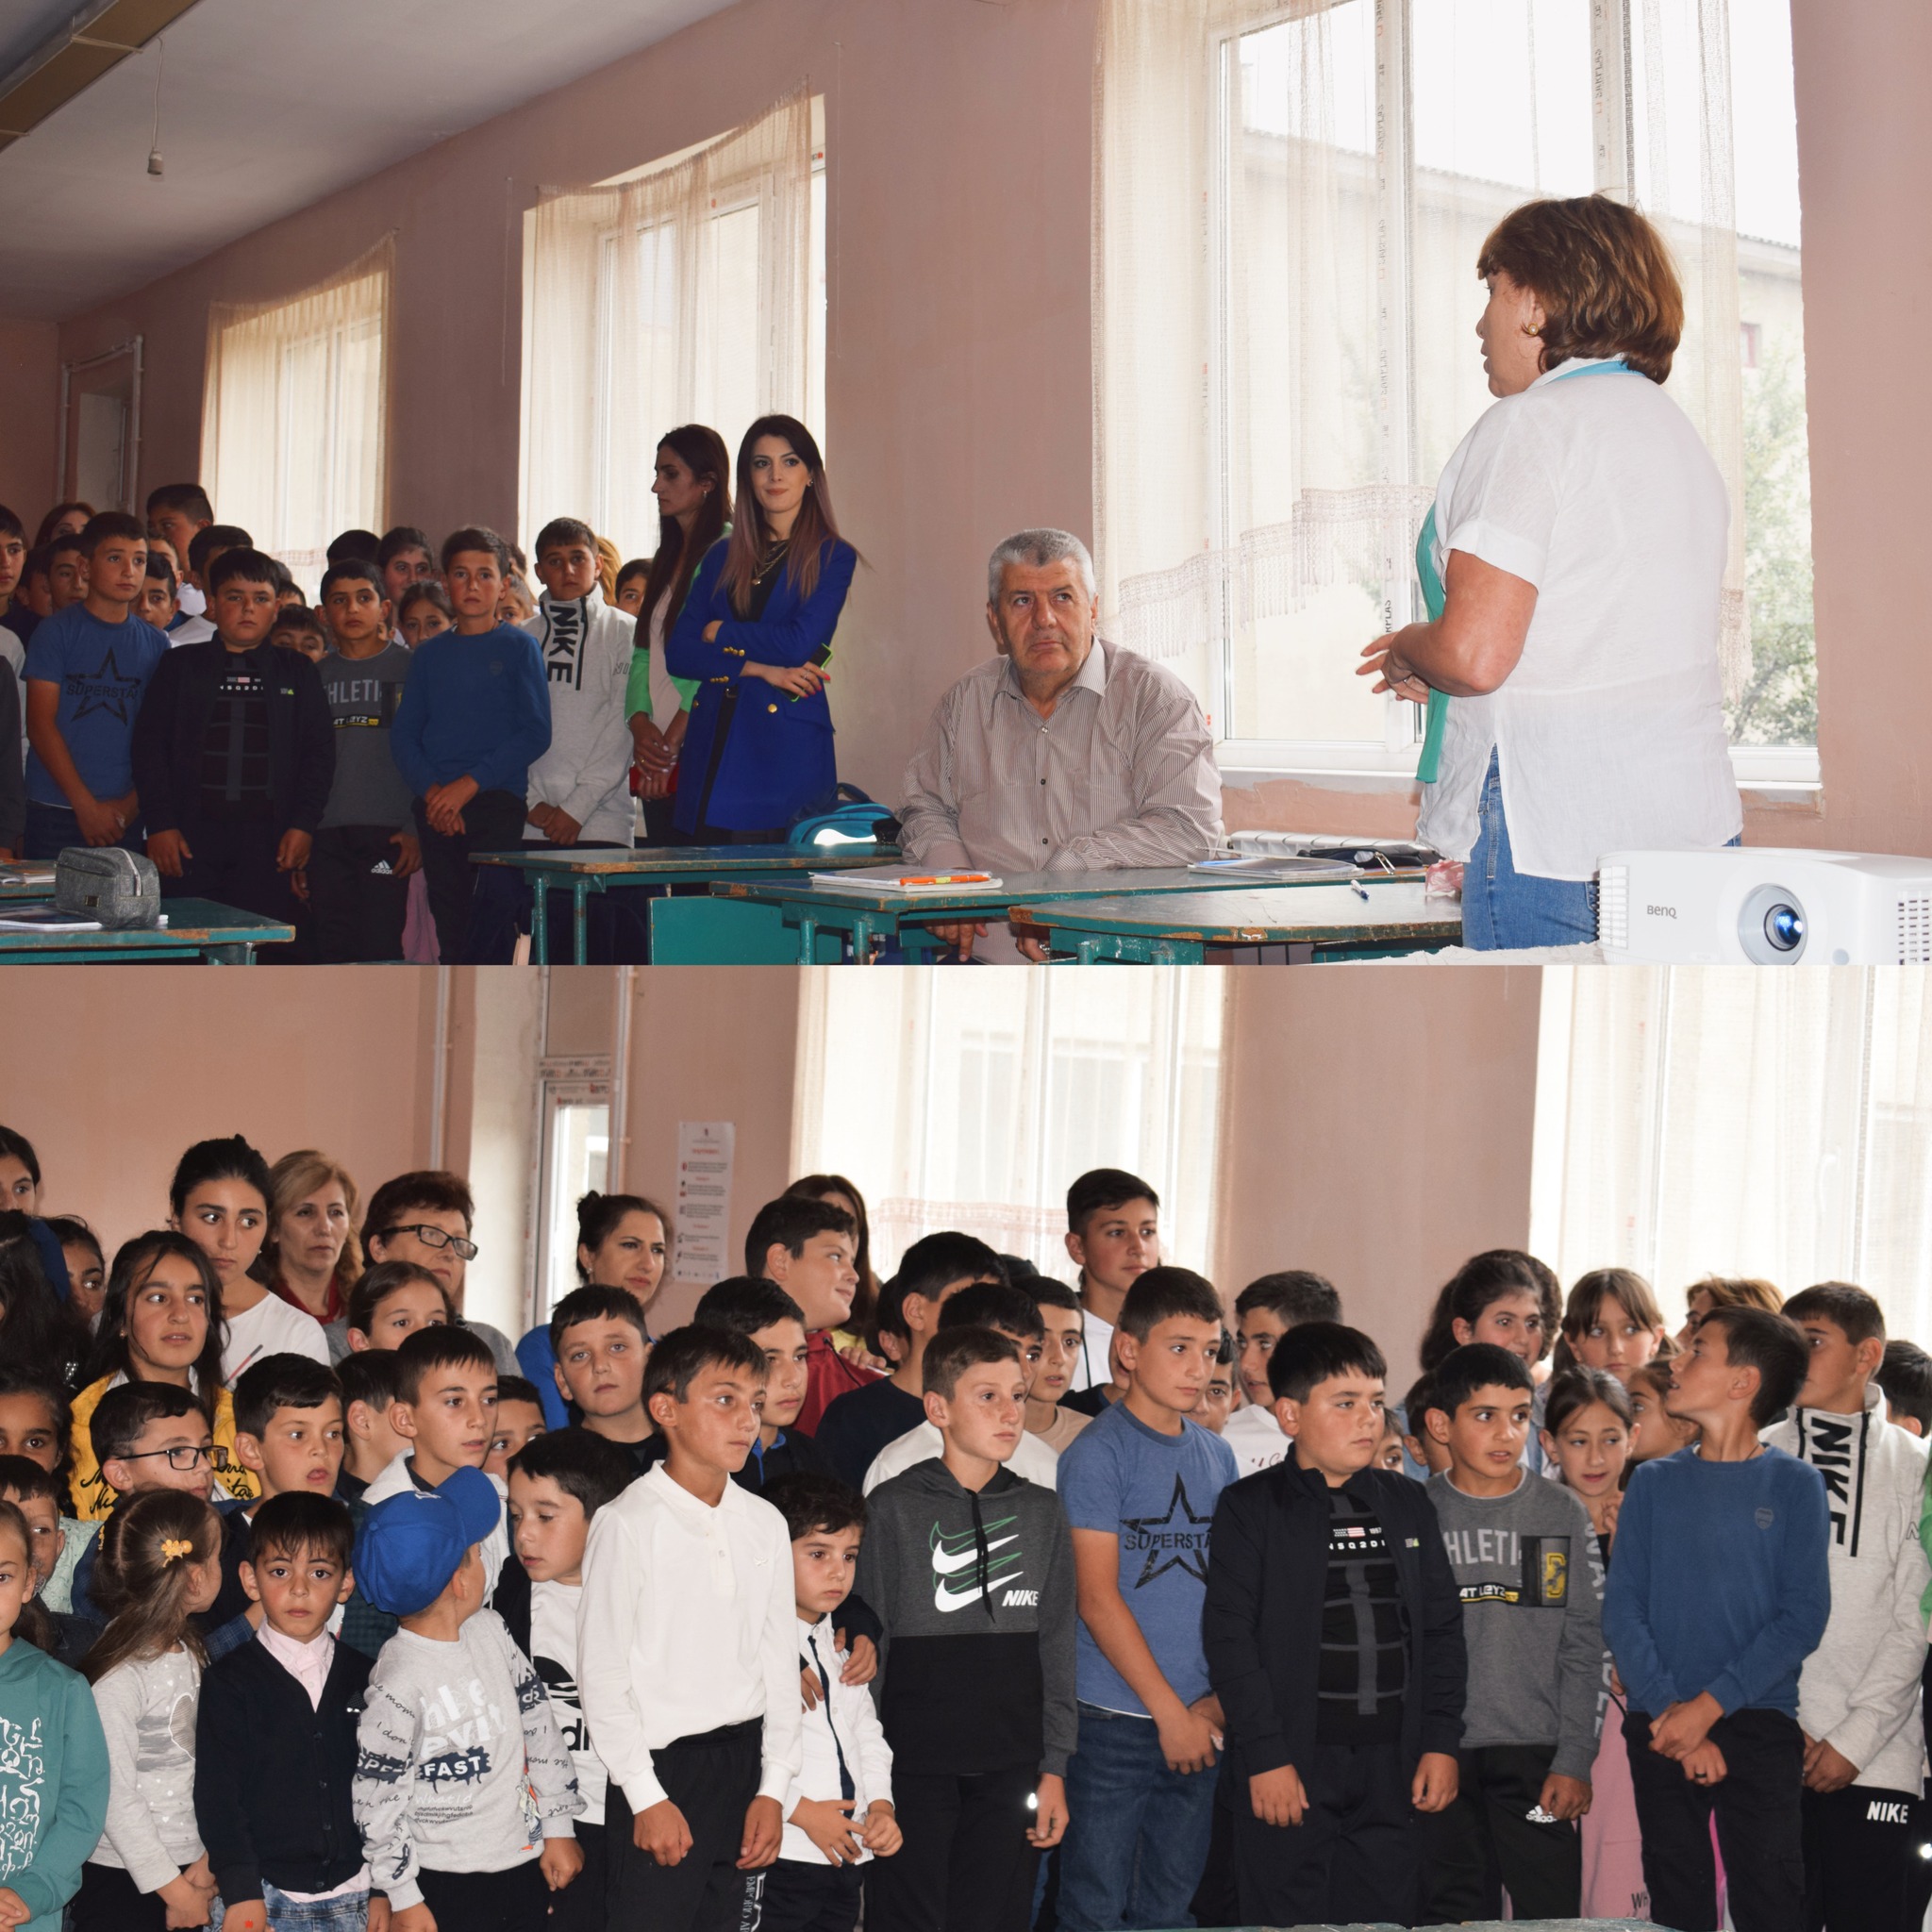 “Project for Improving Sanitary Conditions at Public School in Mets Parni village